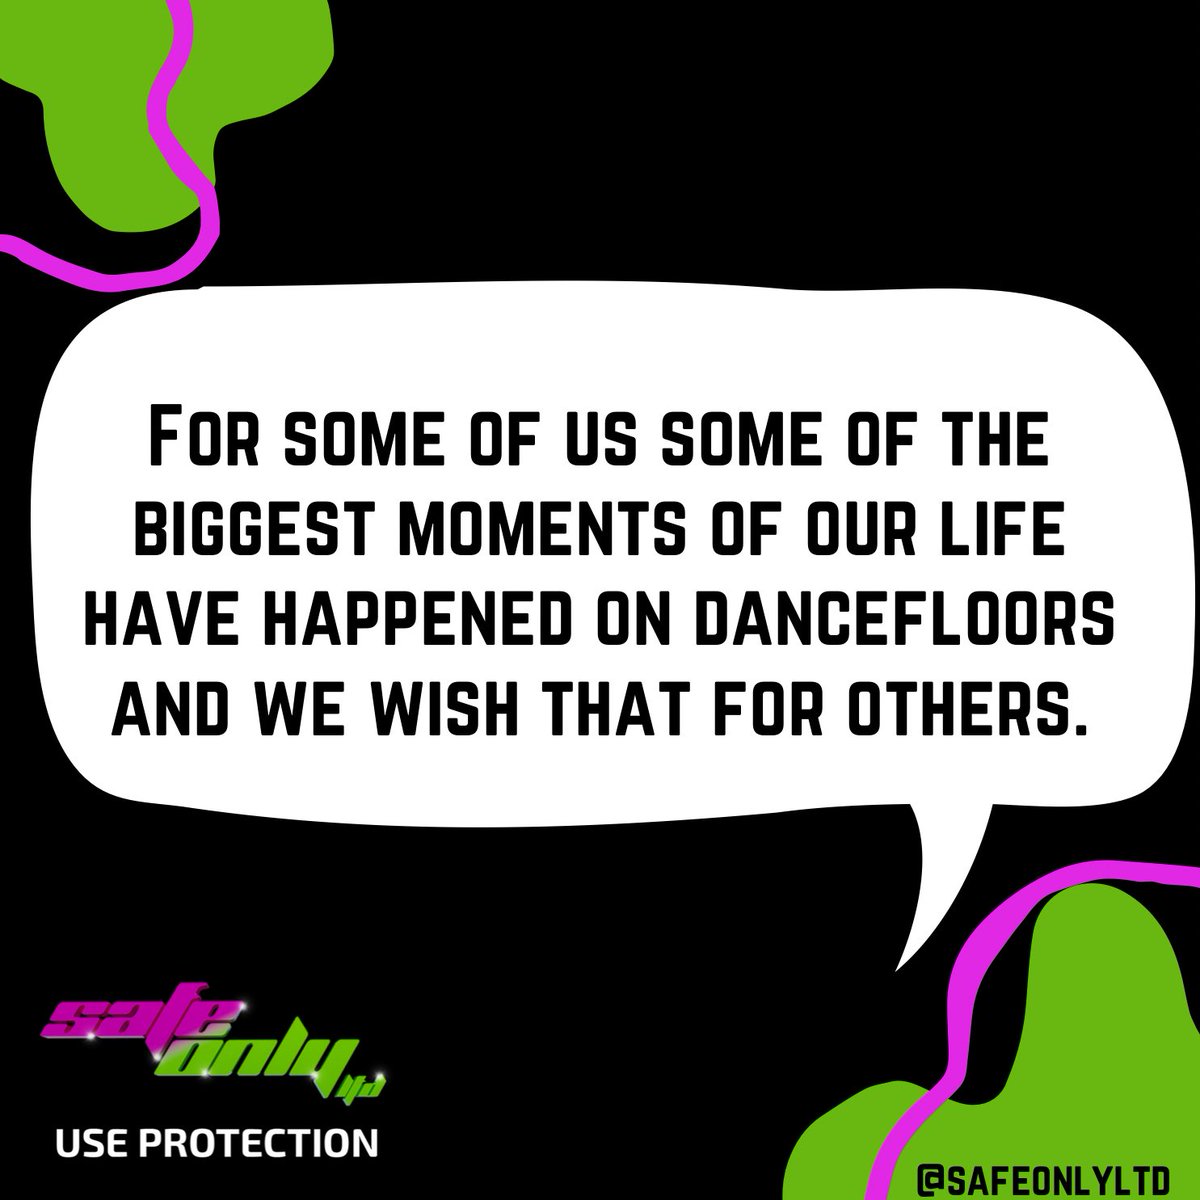 For queer people a dancefloor doesn’t only serve for dancing, it serves for self expression, self discovery, its also a place to fall in love, dream, make new friends….we want to be here to support your experience and to make it a safe one. #queer #trans #welfaresupport